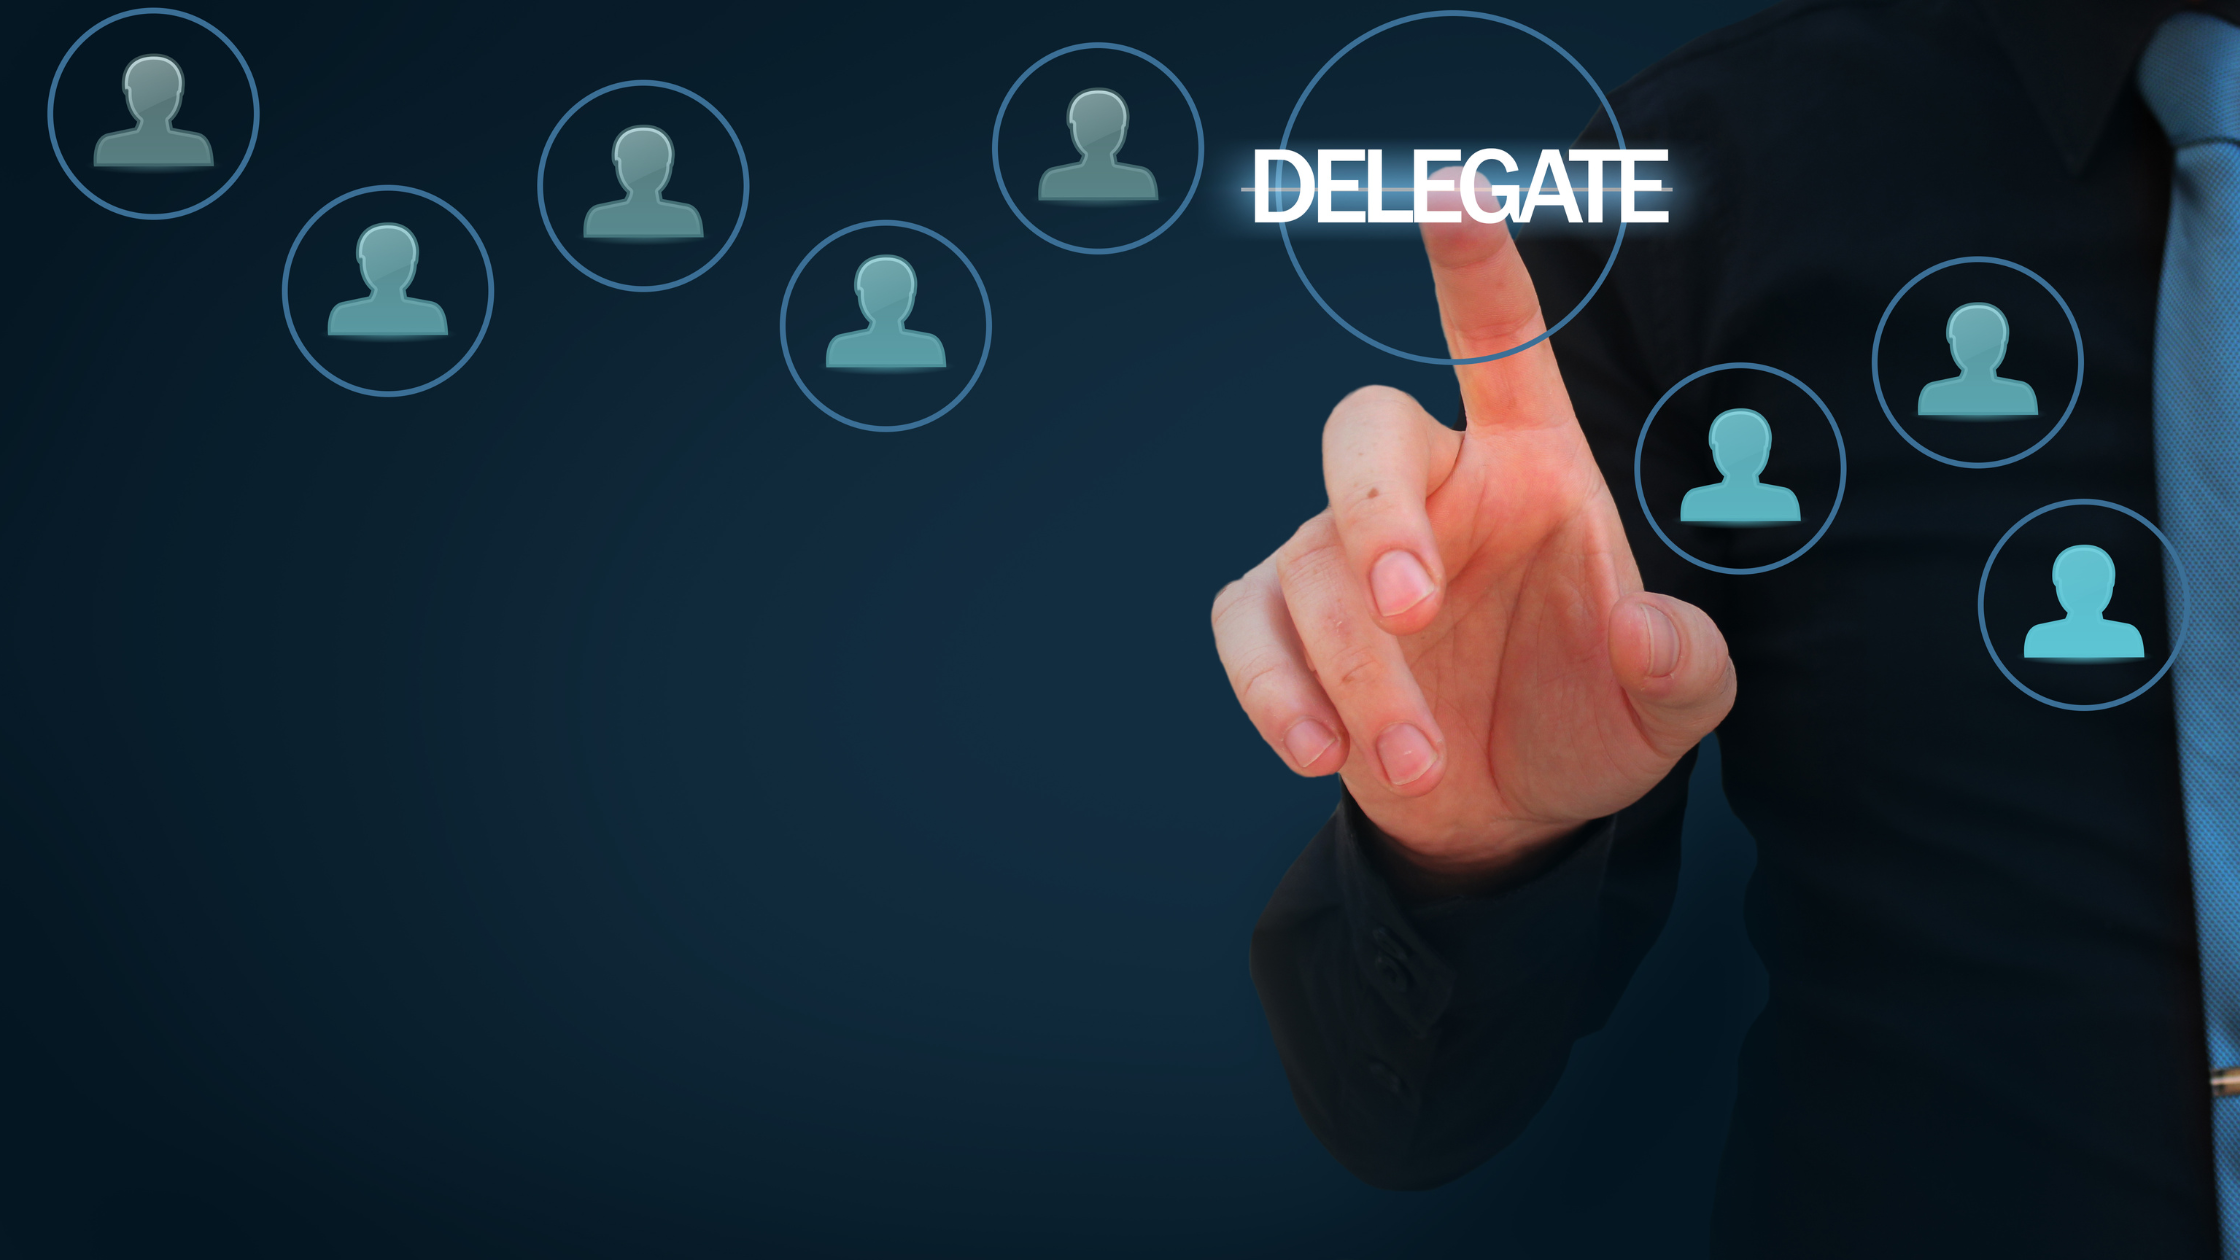 Good Leaders Know How and When to Delegate Effectively